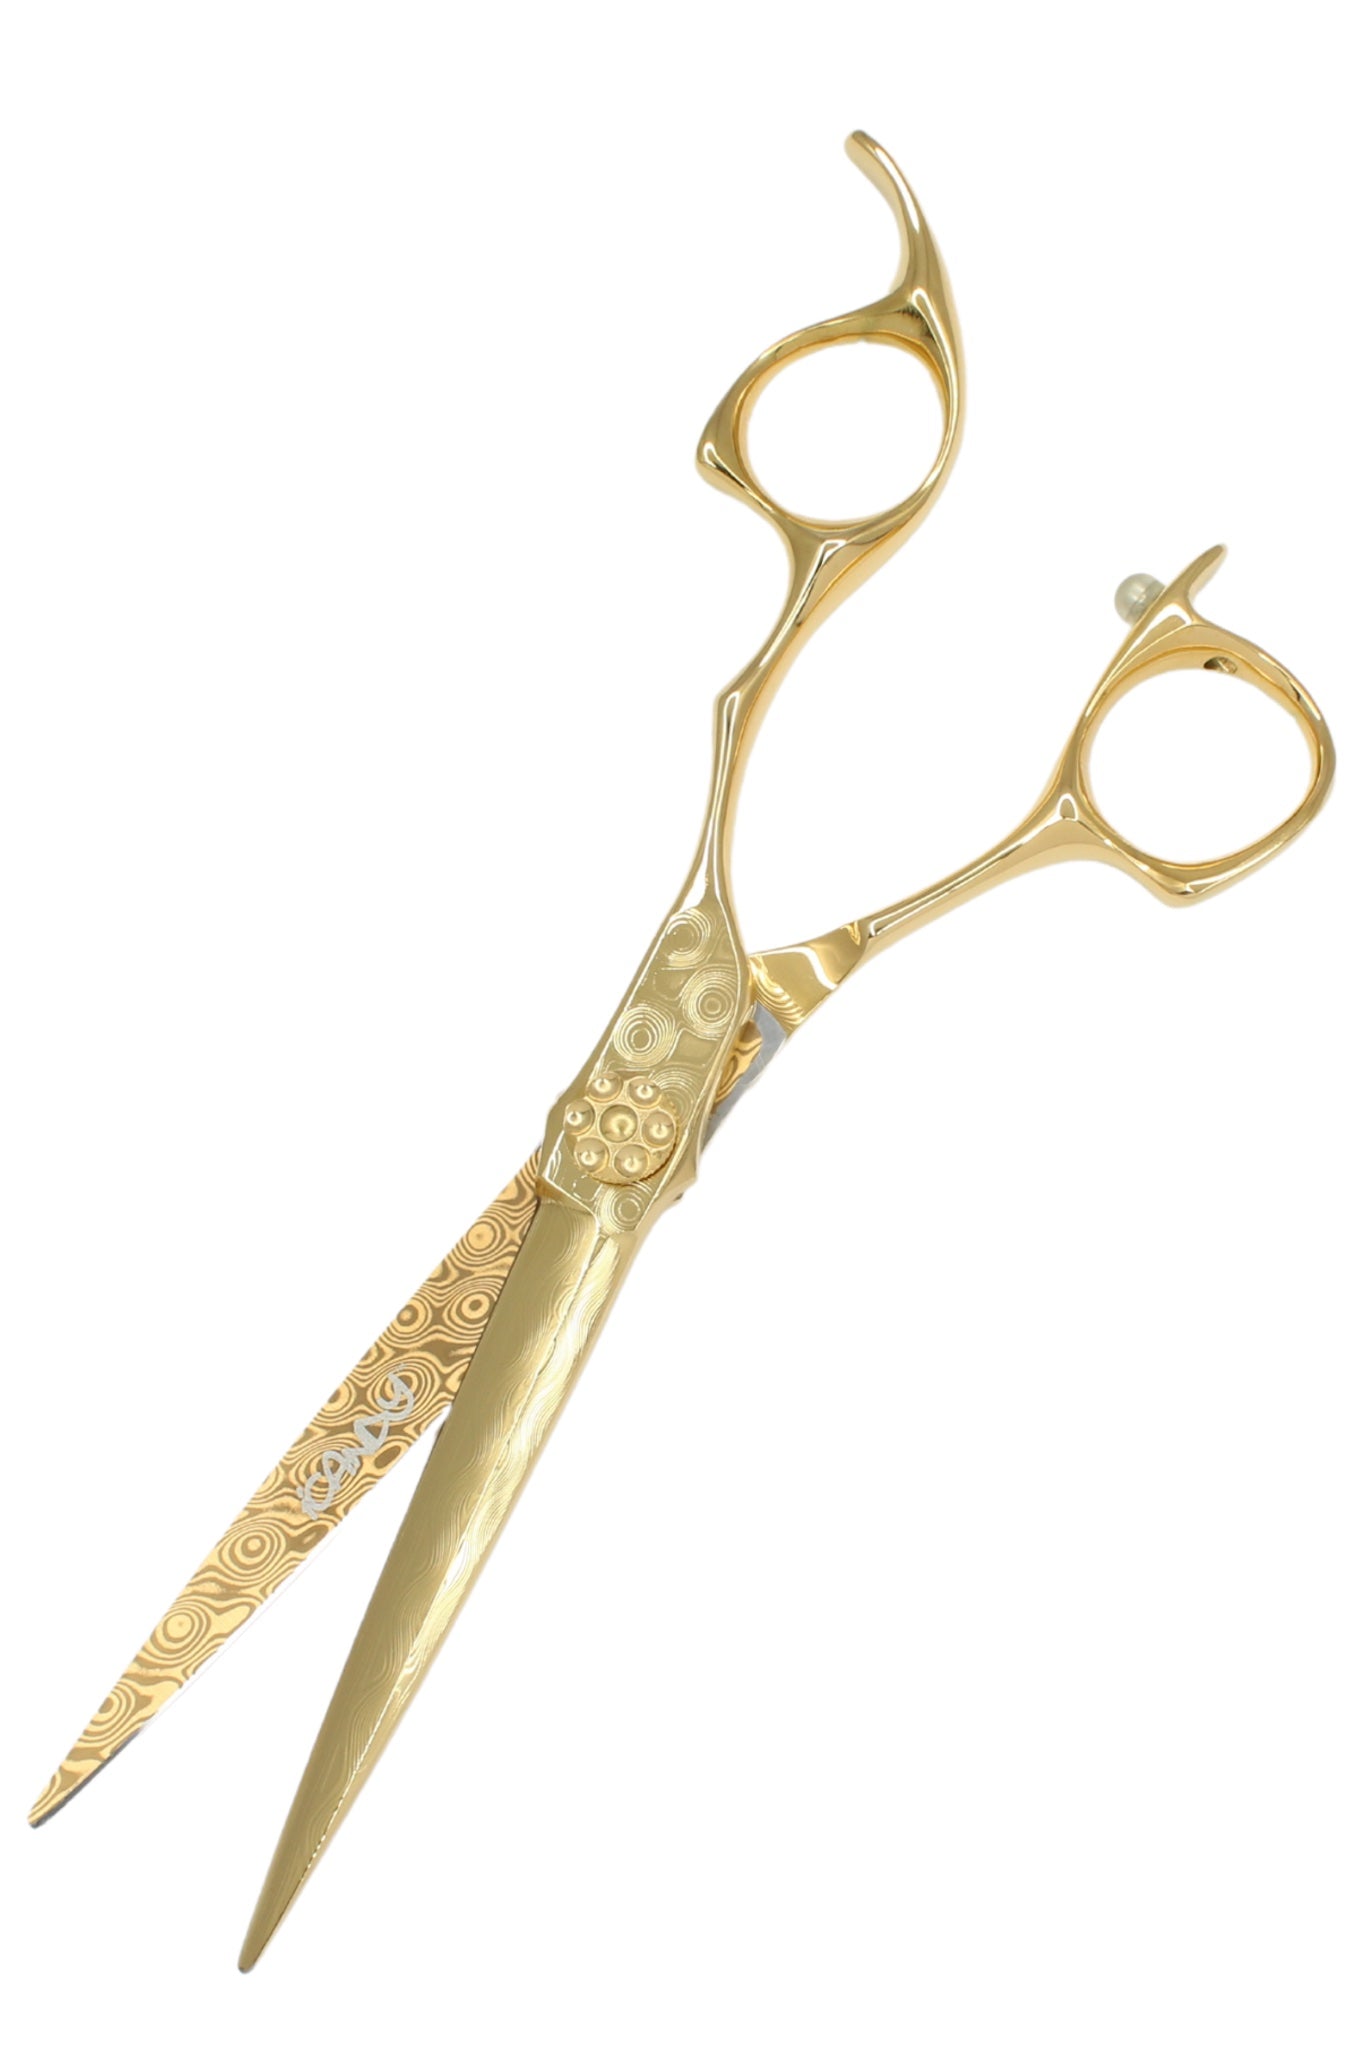 iCandy DAMASCUS ALL STAR Yellow Gold Scissor 6.5" Pic3